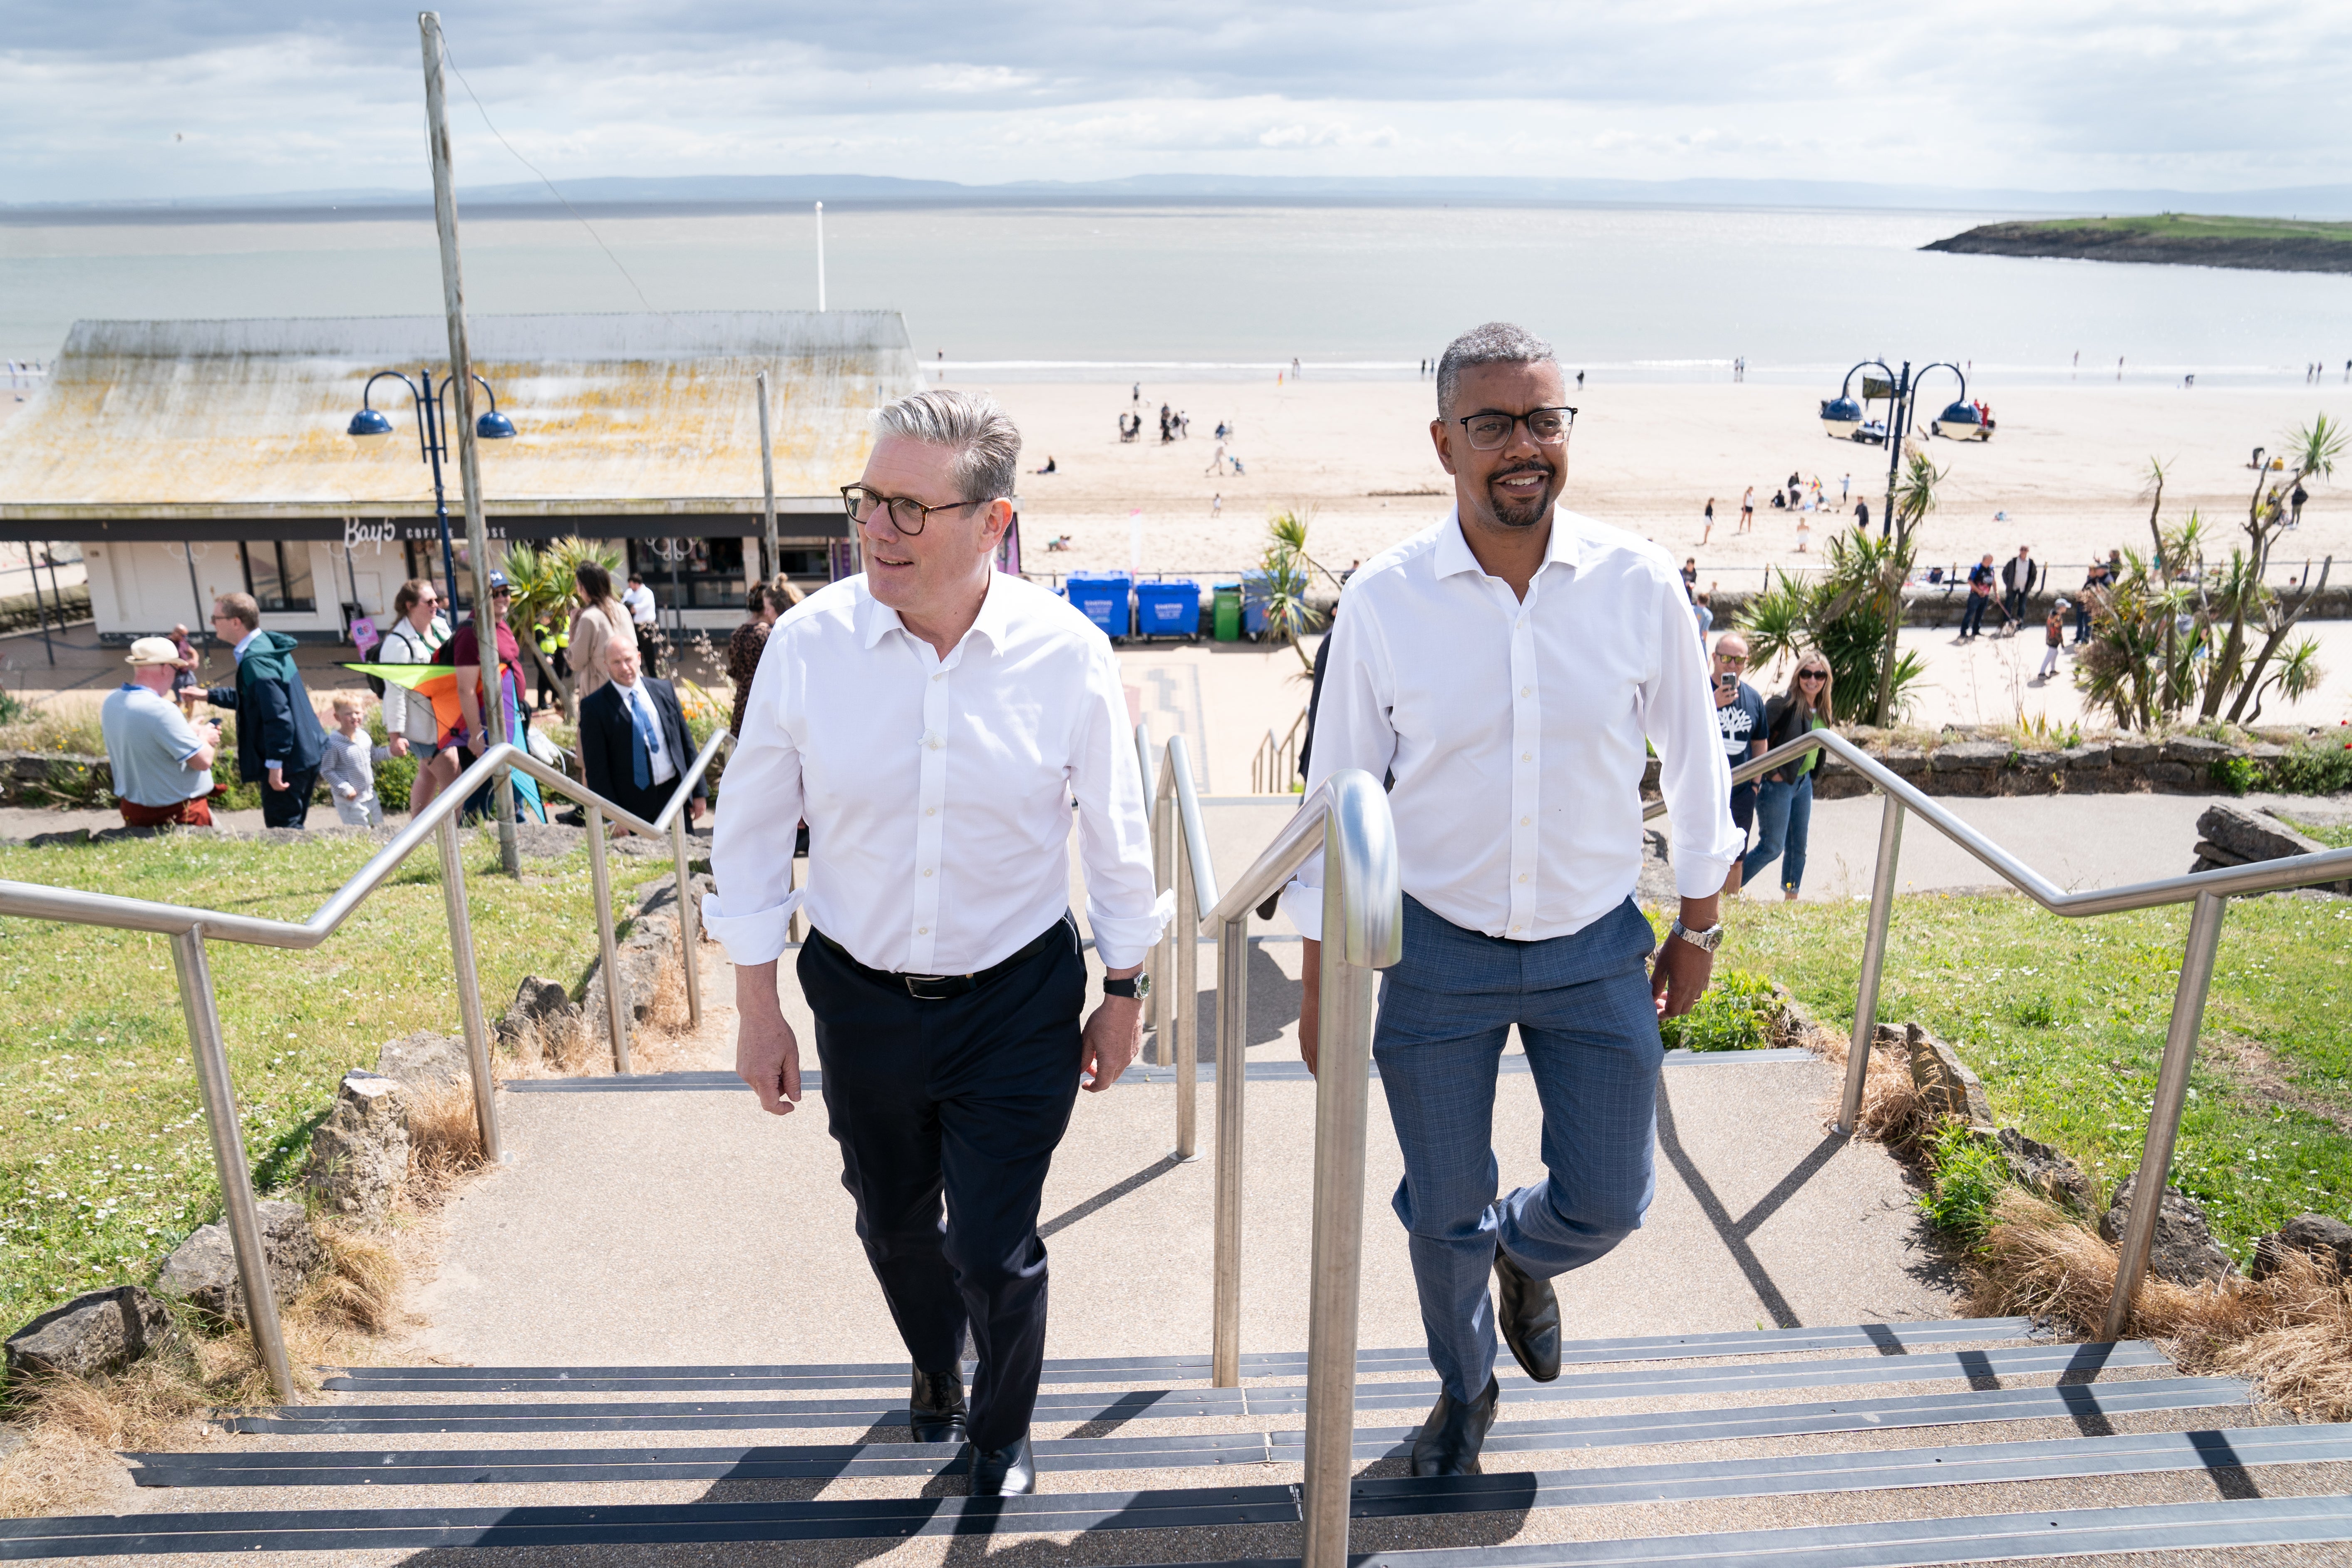 Sir Keir and First Minister of Wales Vaughan Gething enjoyed a turn on Barry seafront after launching Labour’s six steps for change in Wales in Abergavenny (Stefan Rousseau/PA)